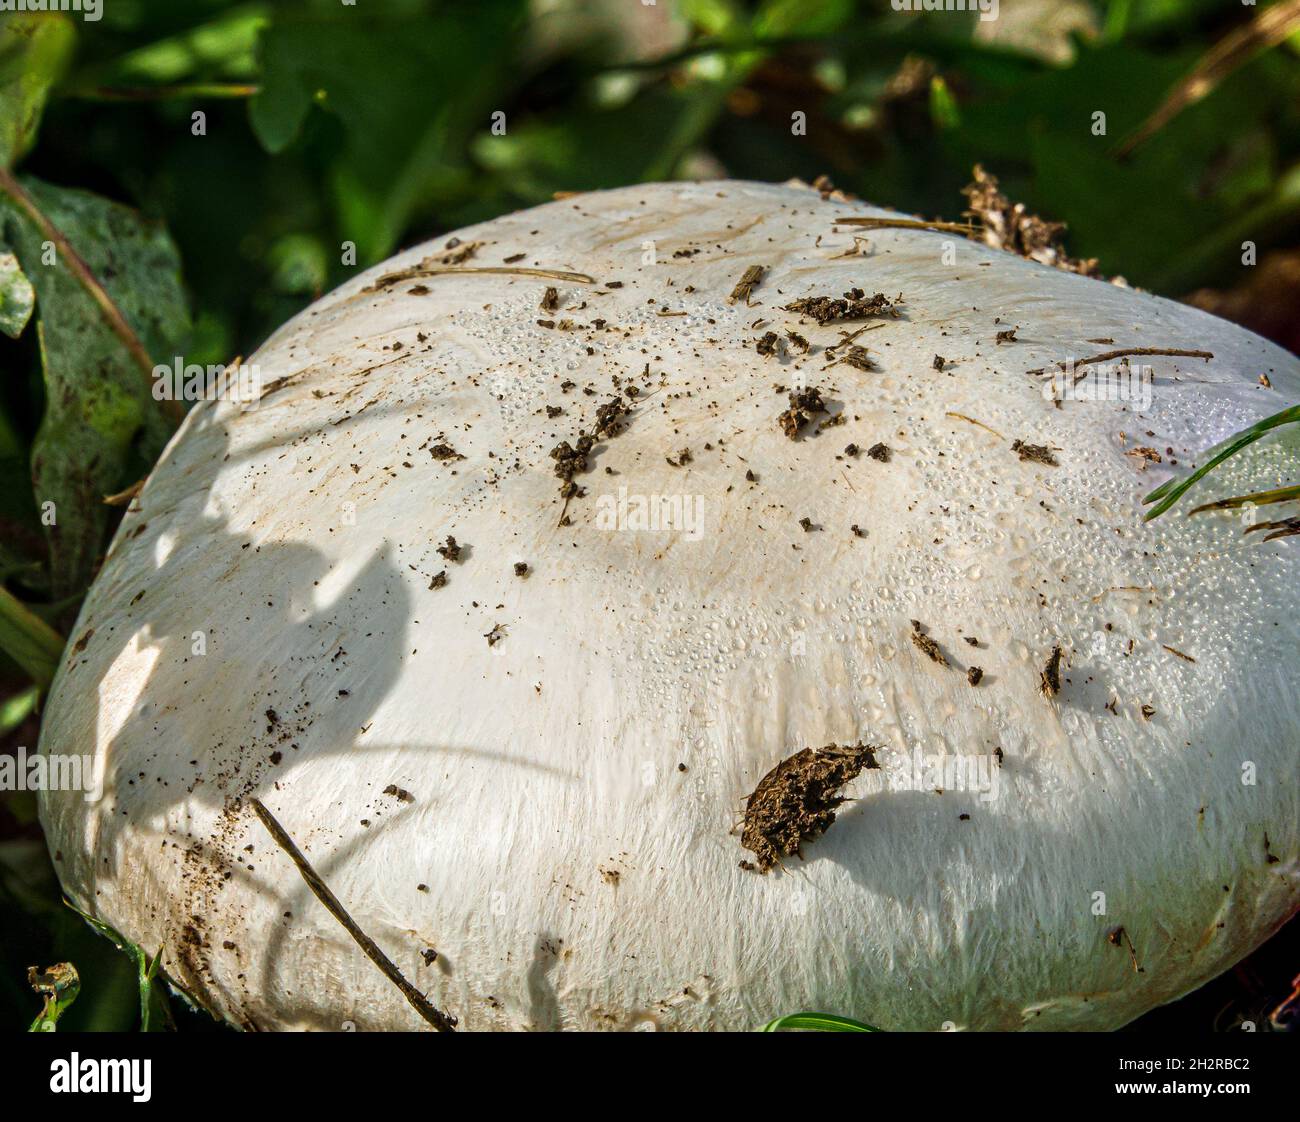 close up detailed view of a Pavement Mushroom cap (Agaricus bitorquis) also known as the spring agaric, banded agaric and torq. An edible white mushro Stock Photo